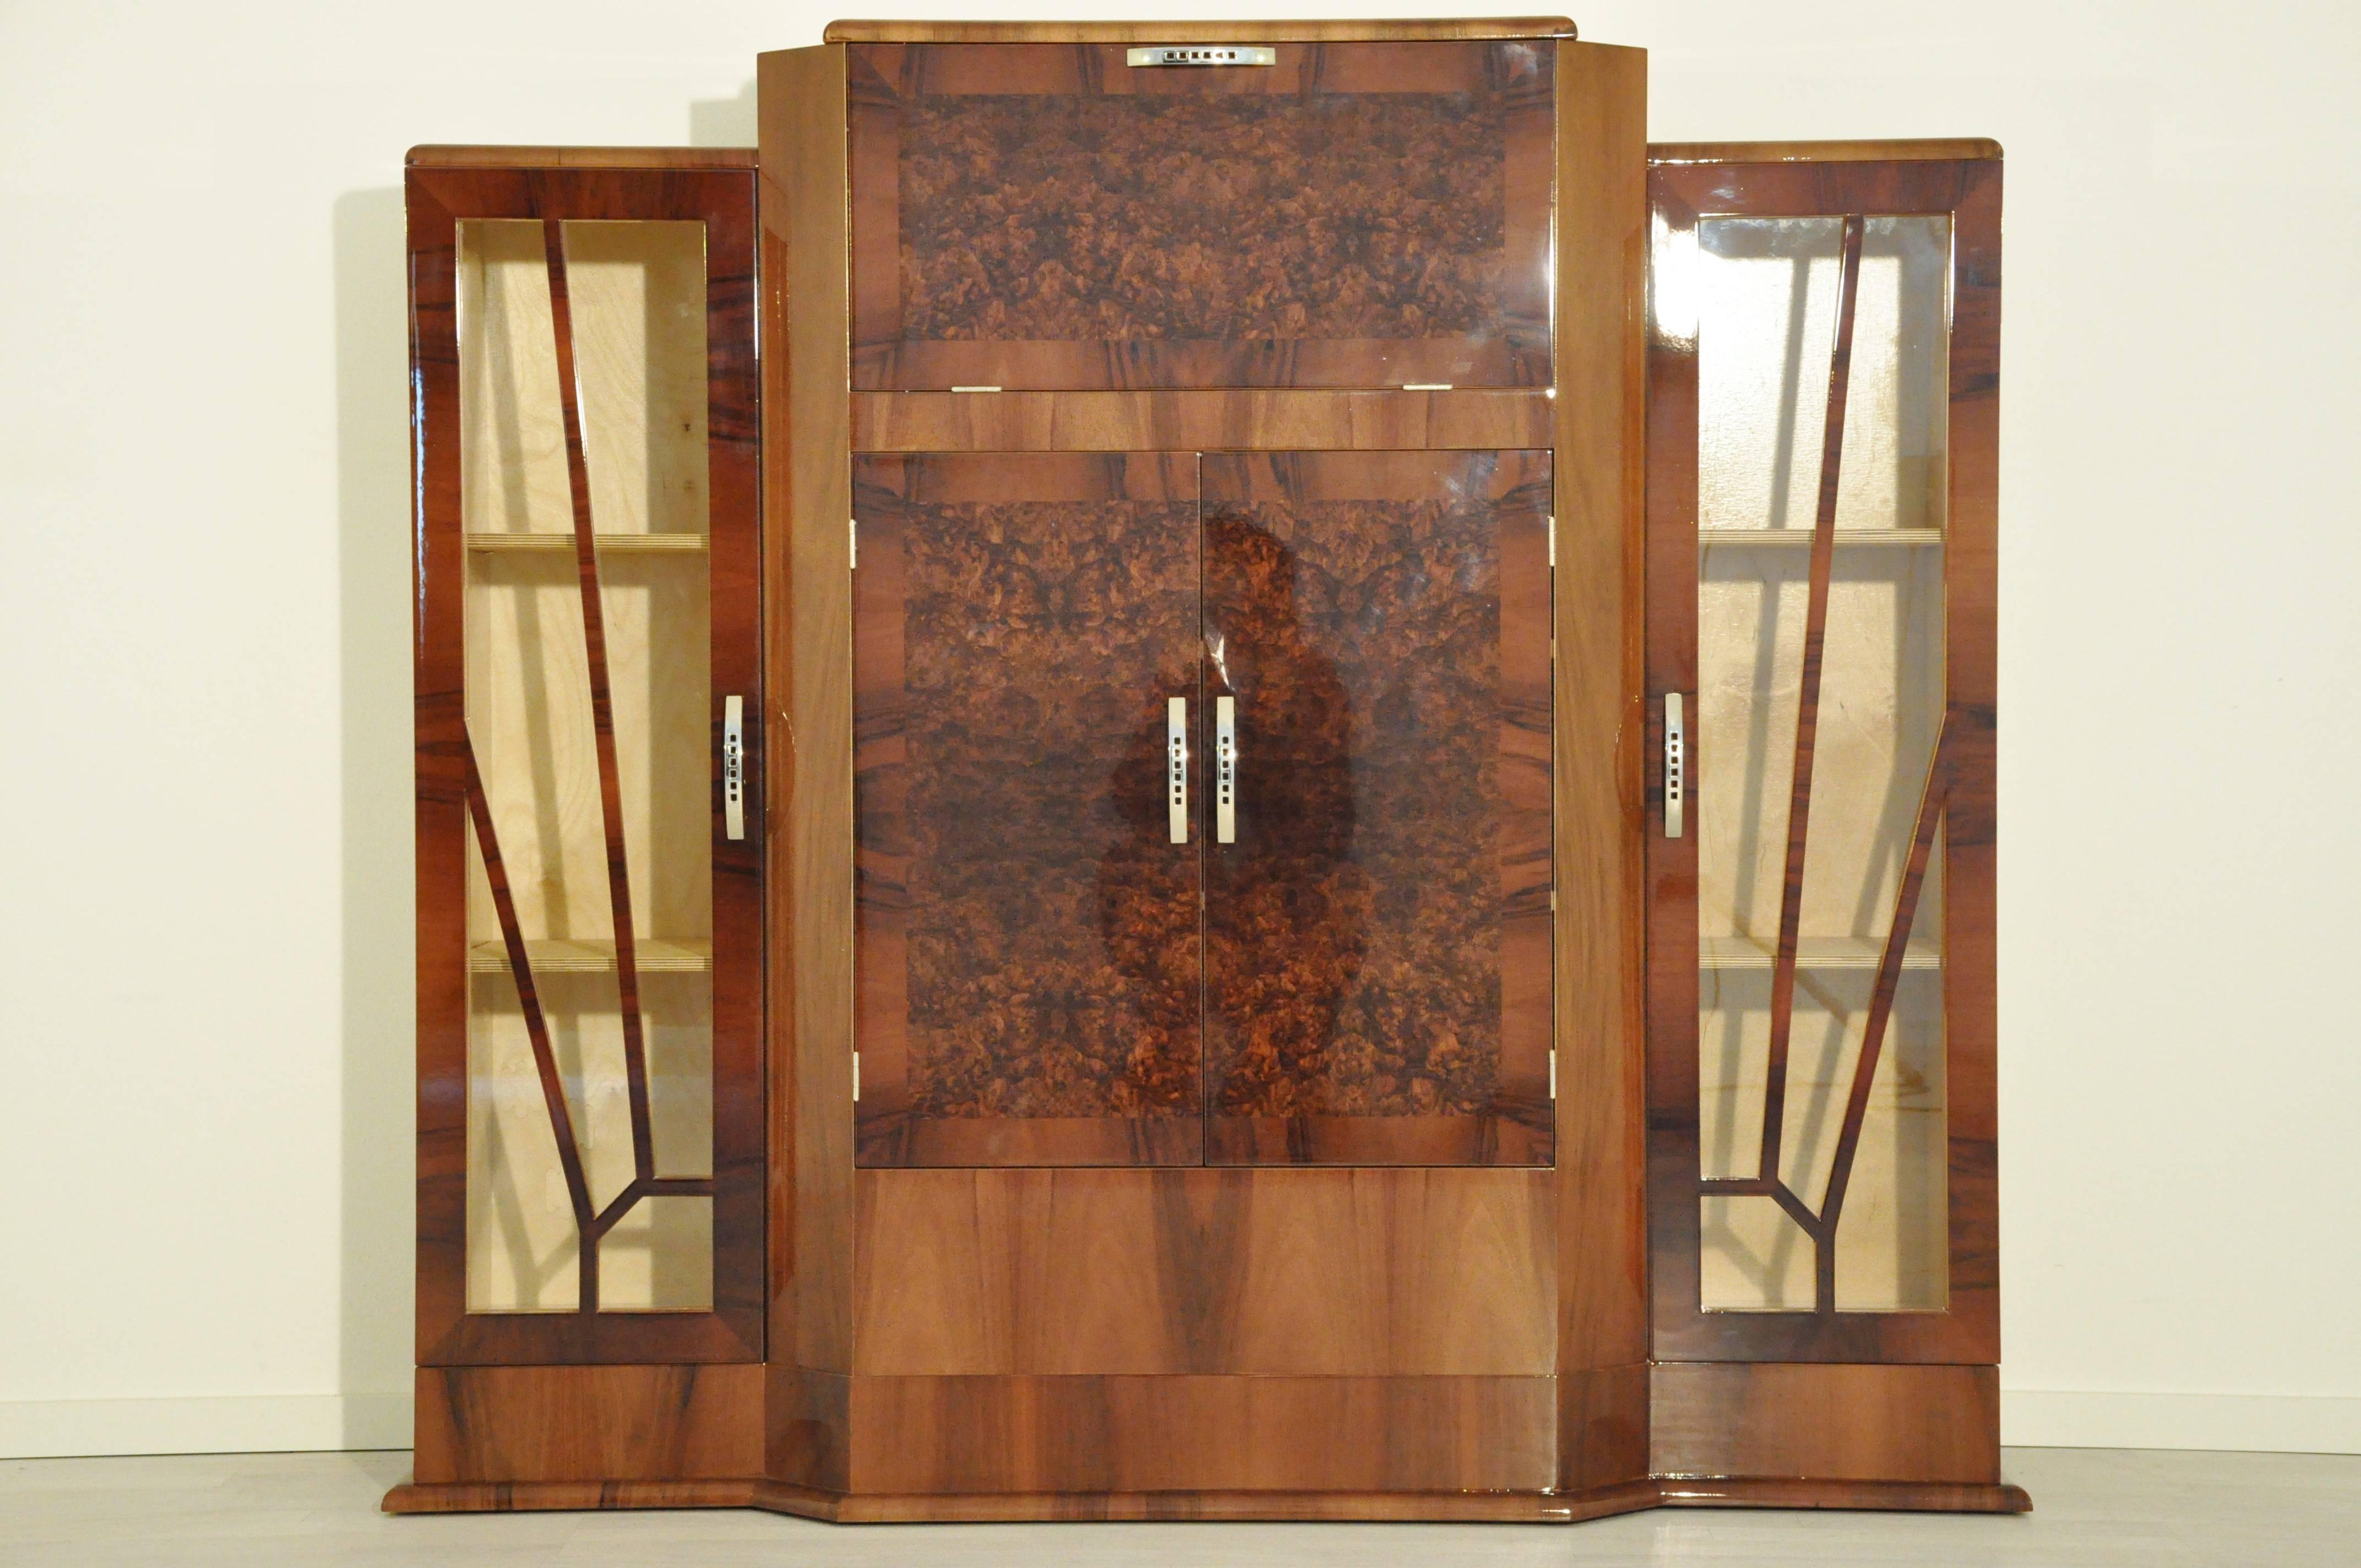 Great Art Deco bar cabinet made of gorgeous walnut wood with different grains. It offers a typical Art Deco design, a serving area with mirrored panels, and two big showcase compartments on the sides. This special piece of furniture was build by